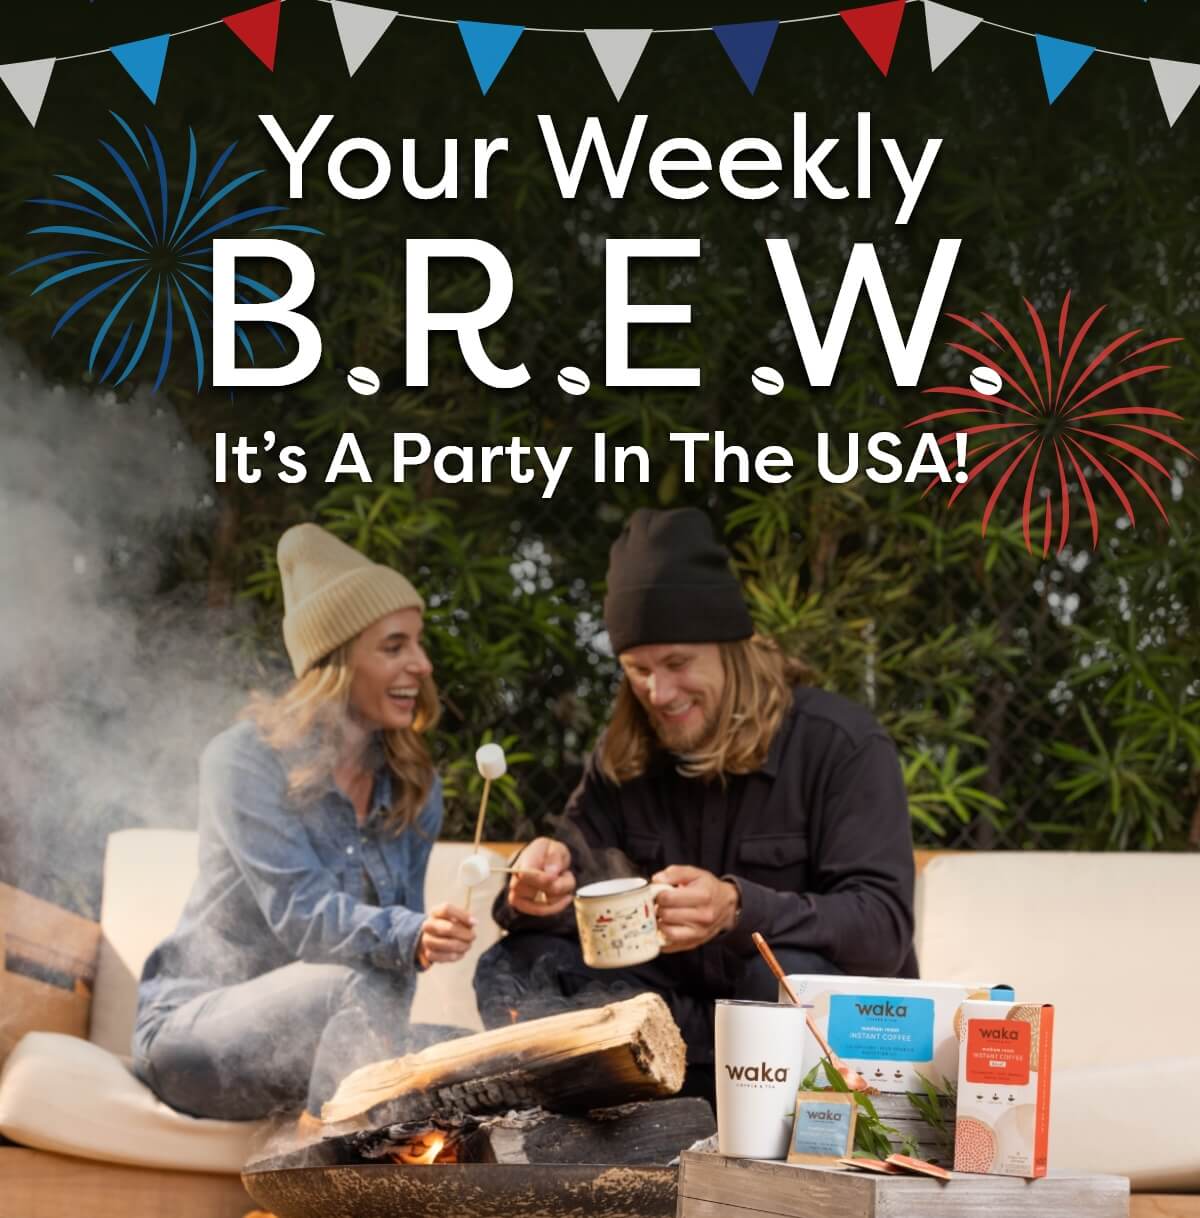 Your weekly B.R.E.W. It's a party in the USA!